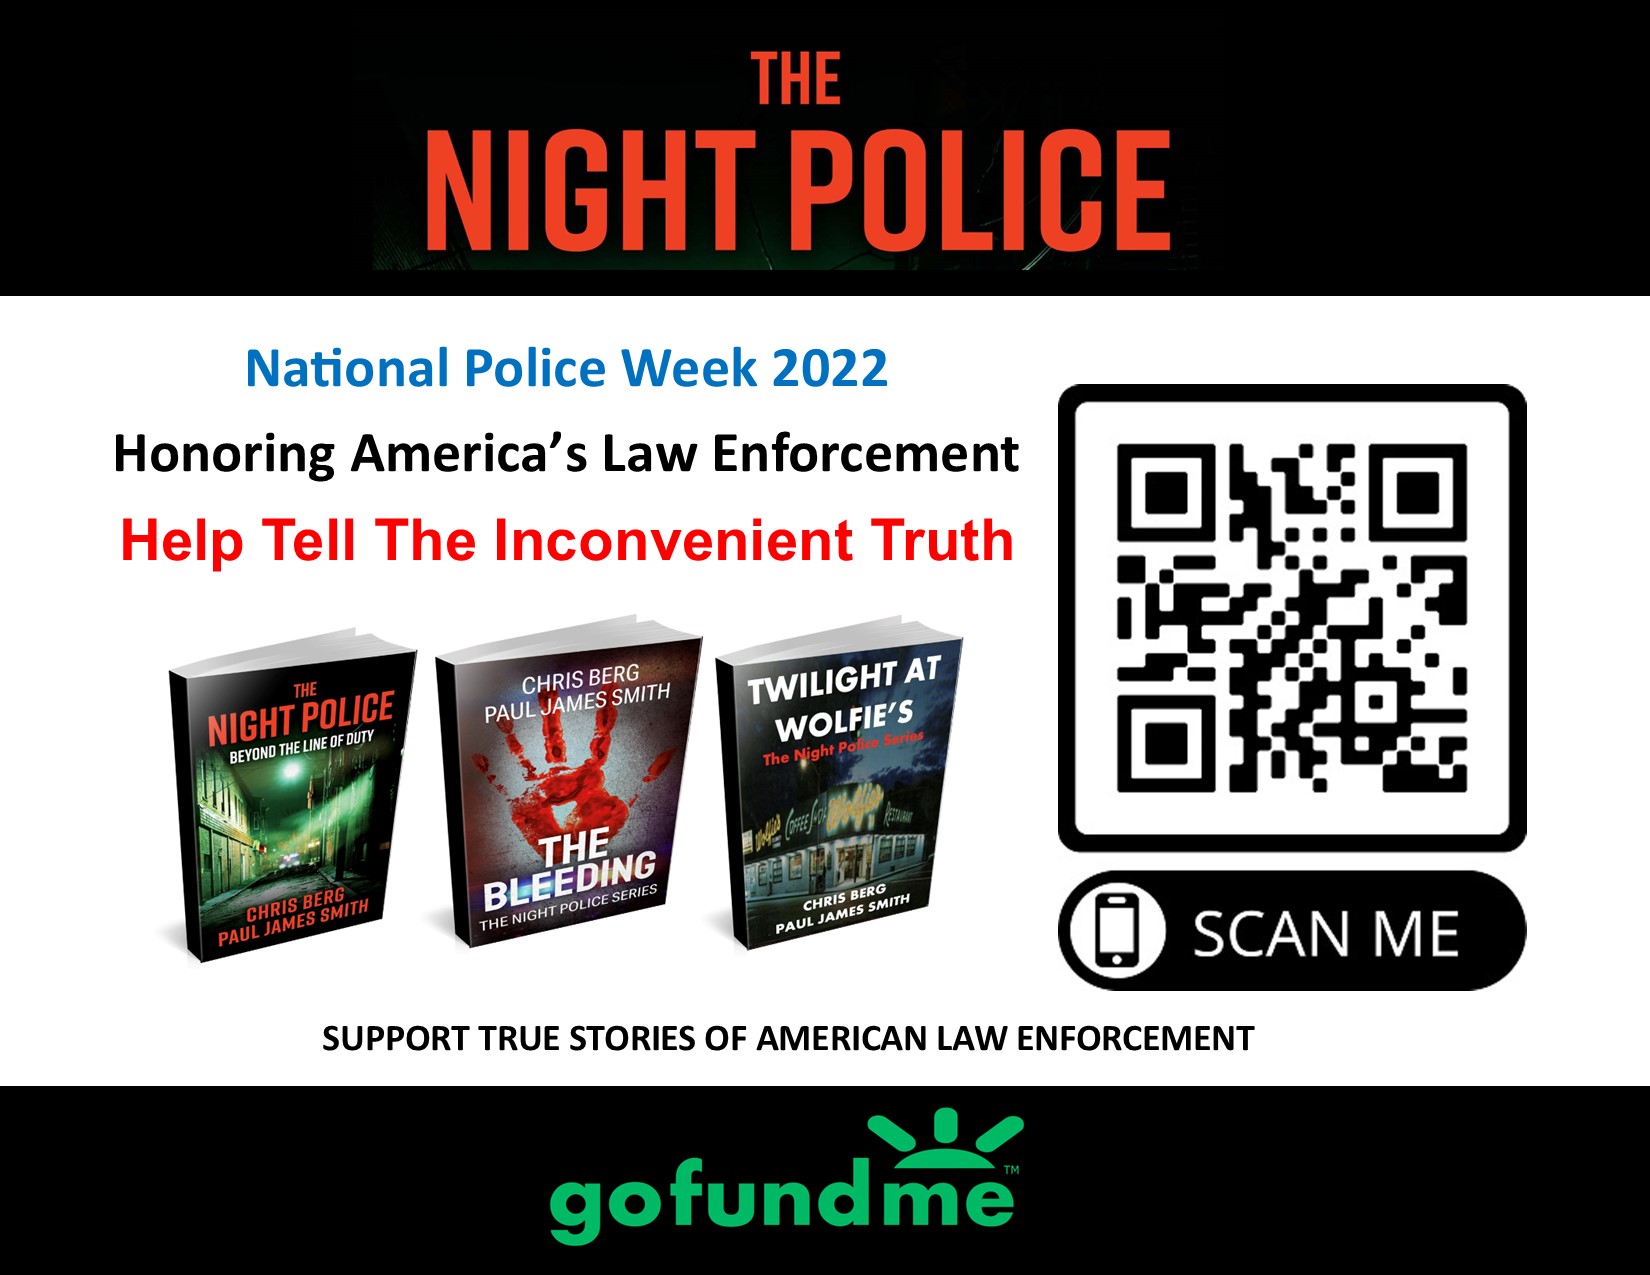 The Night Police Go Fund Me Campaign